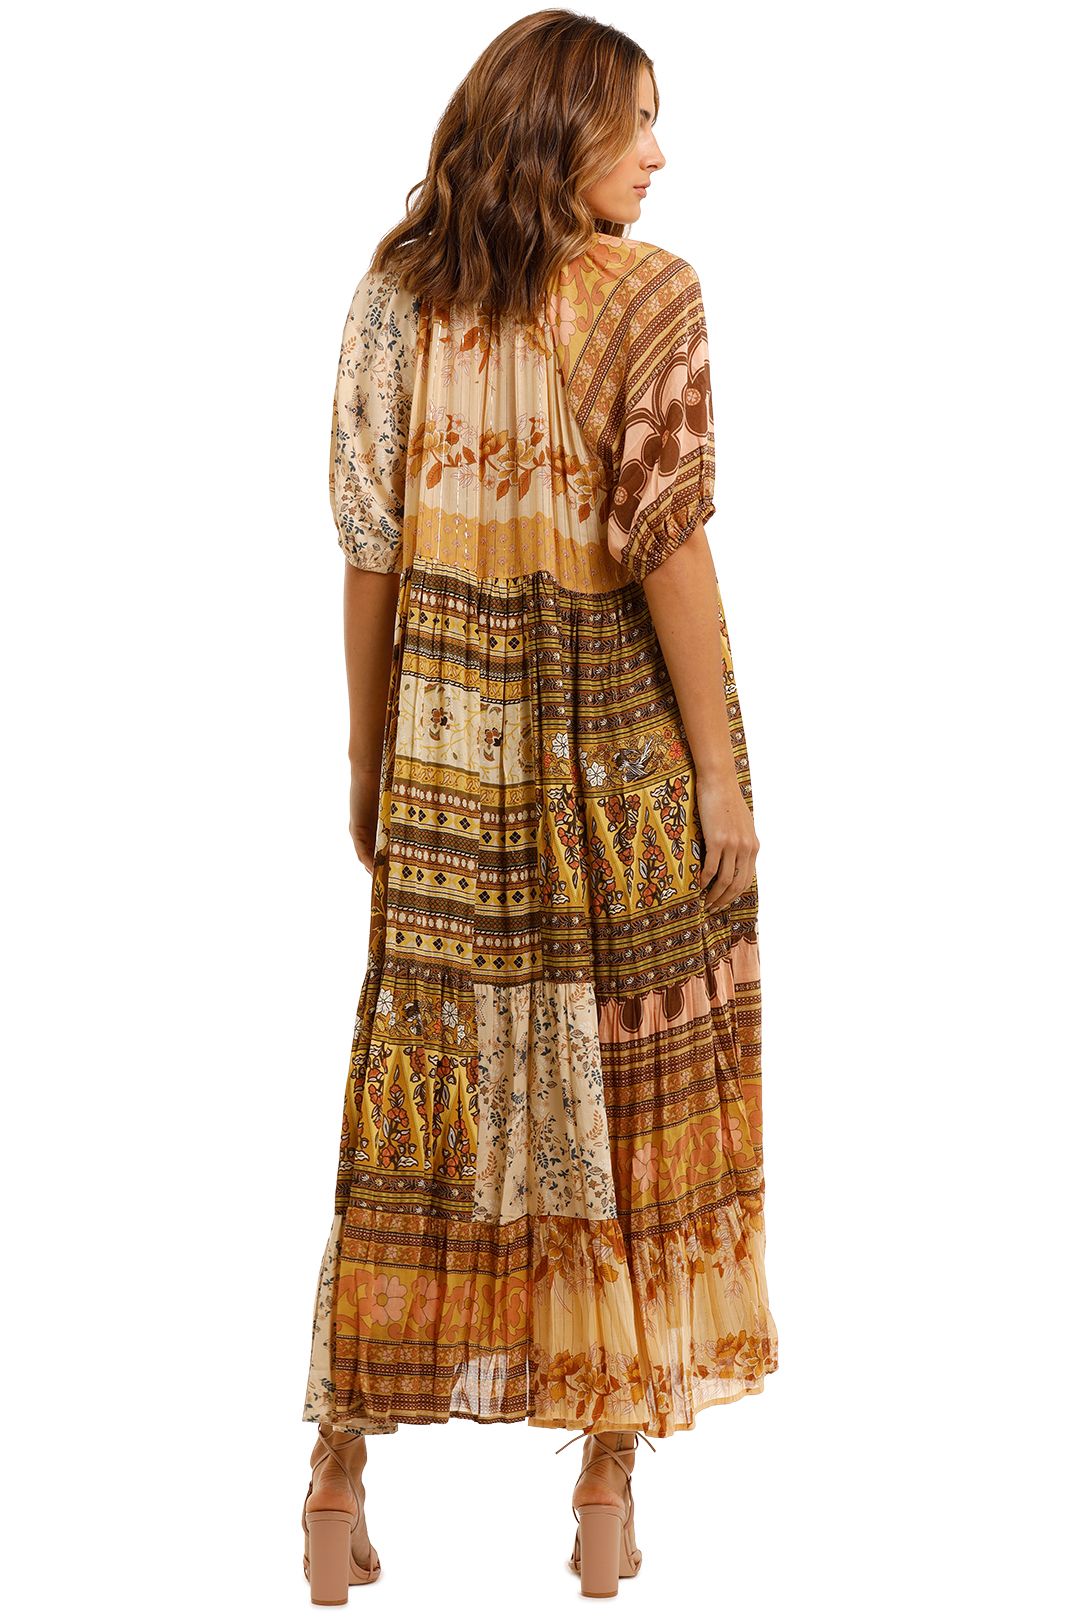 Spell Renew Patchwork Gown Sunrise maxi